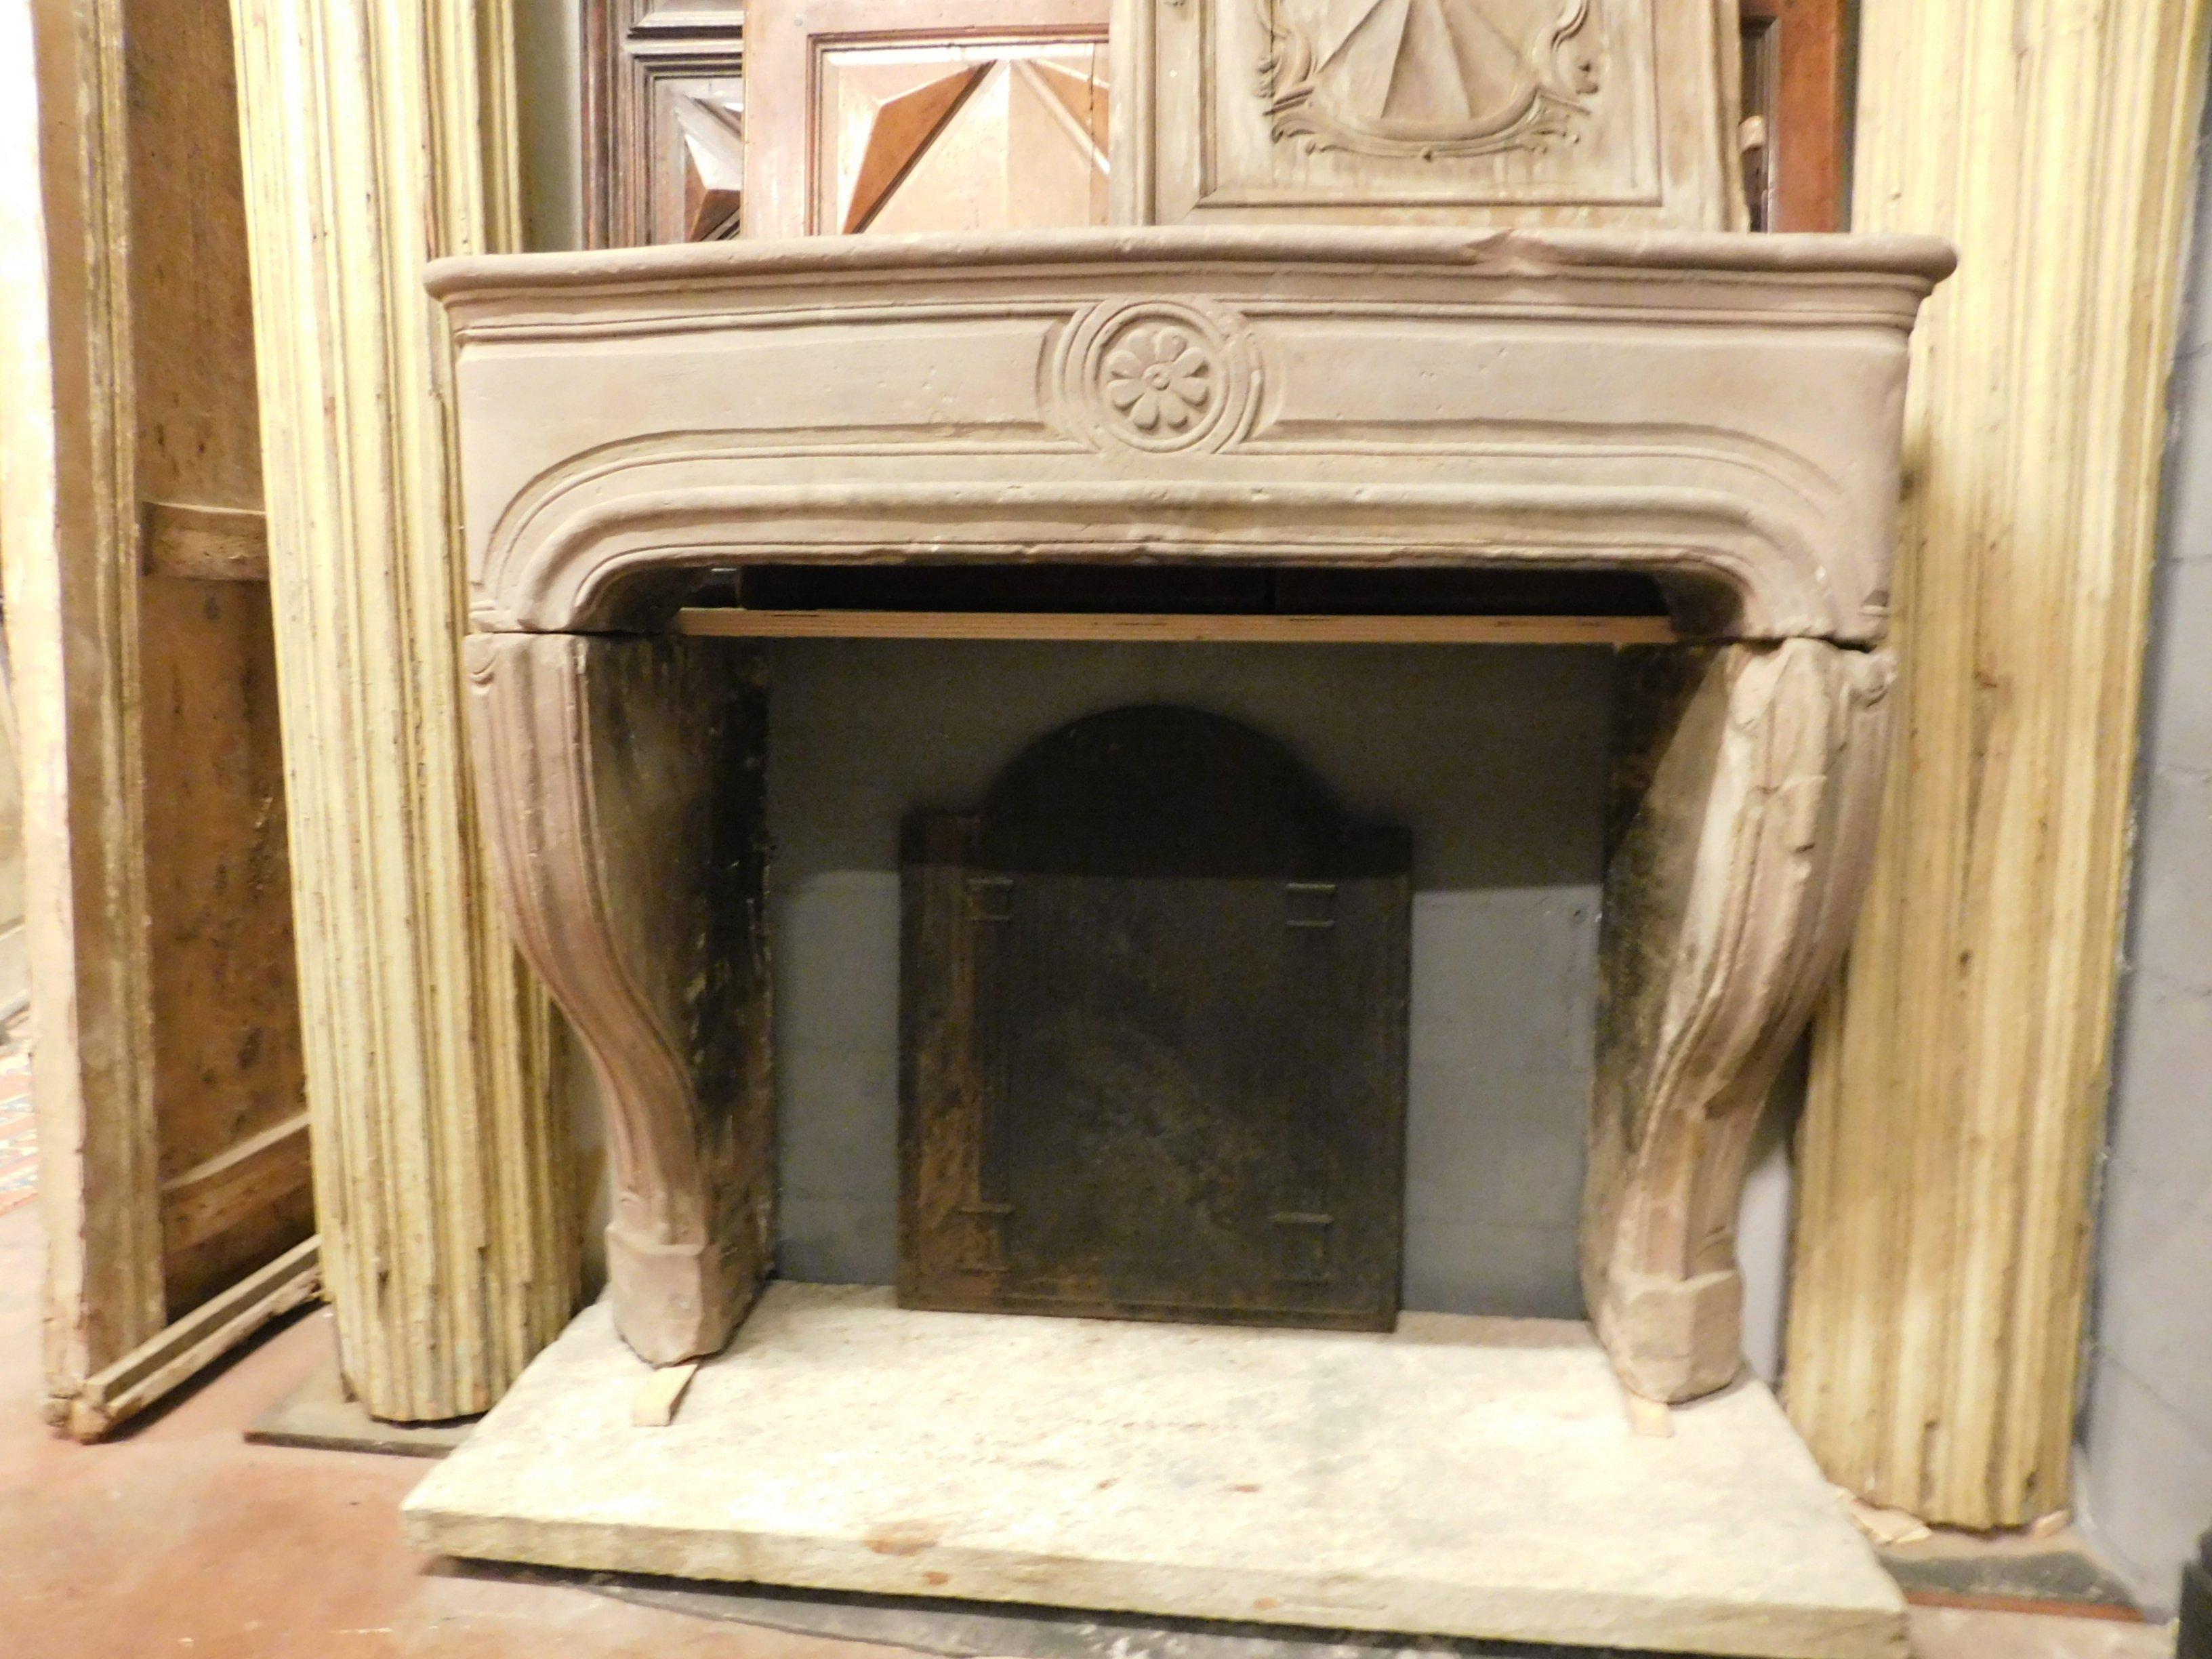 Antique Burgundy stone fireplace, all along its line with central flower, beautiful convex and rounded shape on the front, wavy and protruding legs, entirely hand carved in French stone with a tendency to pink, handmade in the early 18th century,